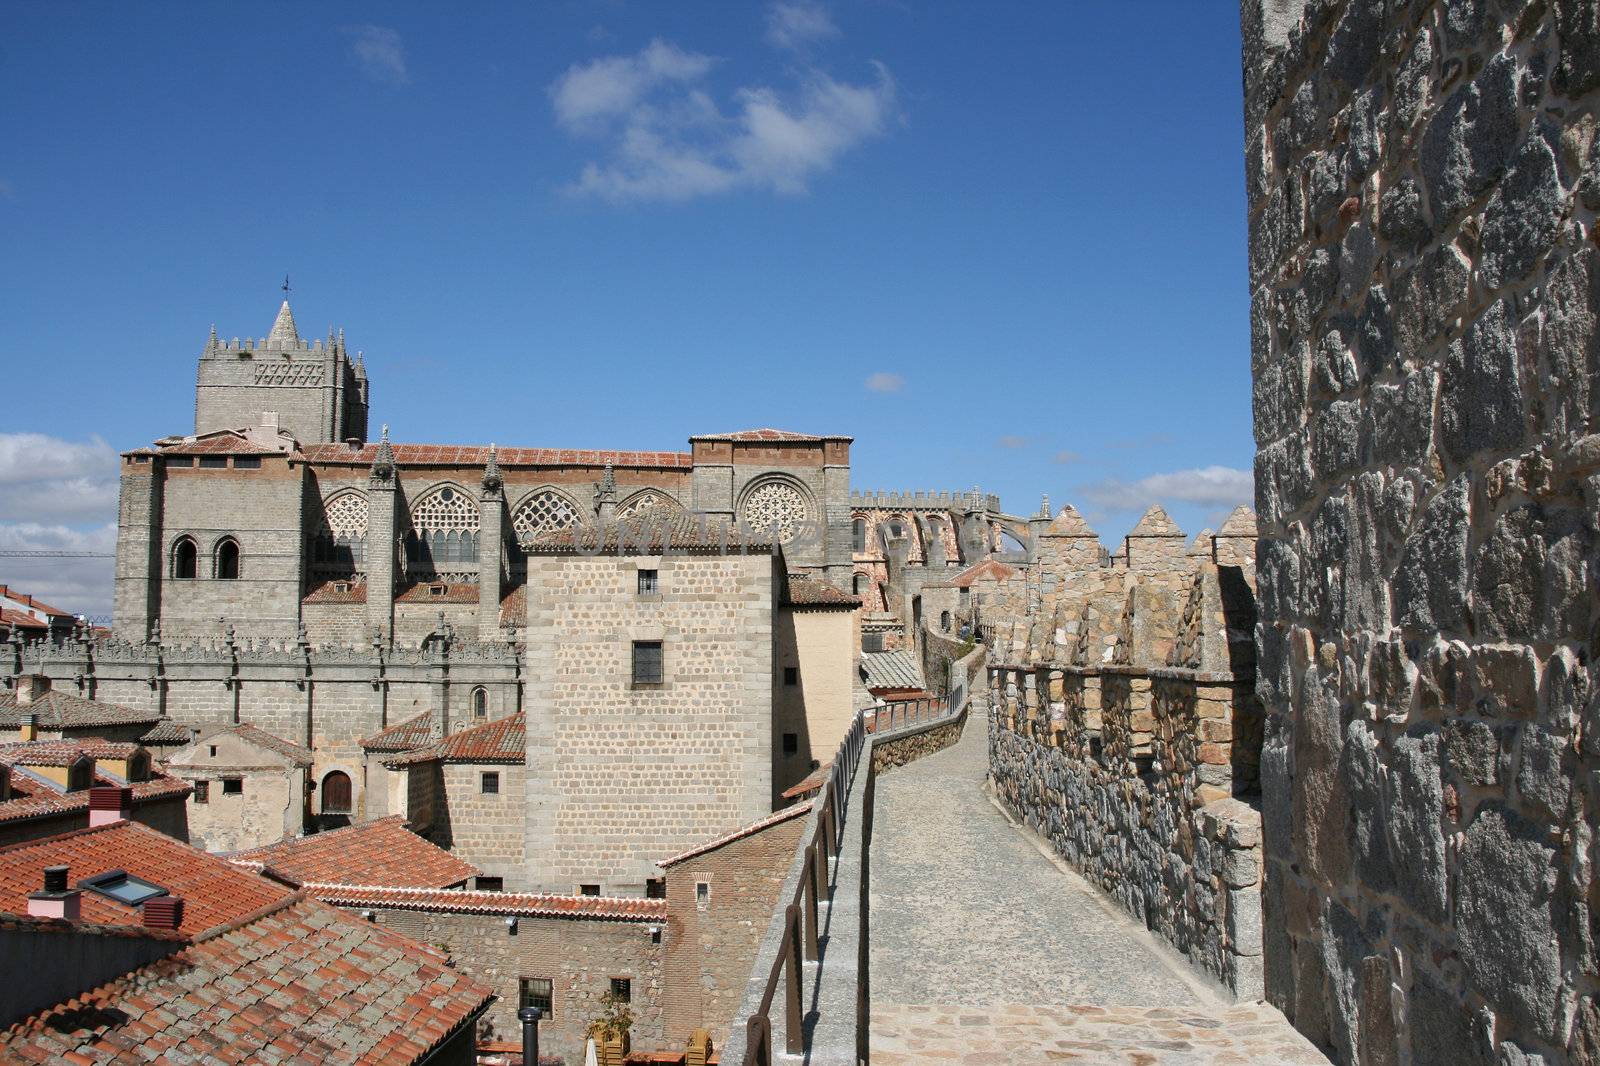 Avila town and cathedral seen from the medieval city walls. Spanish landmarks in Castilia region.